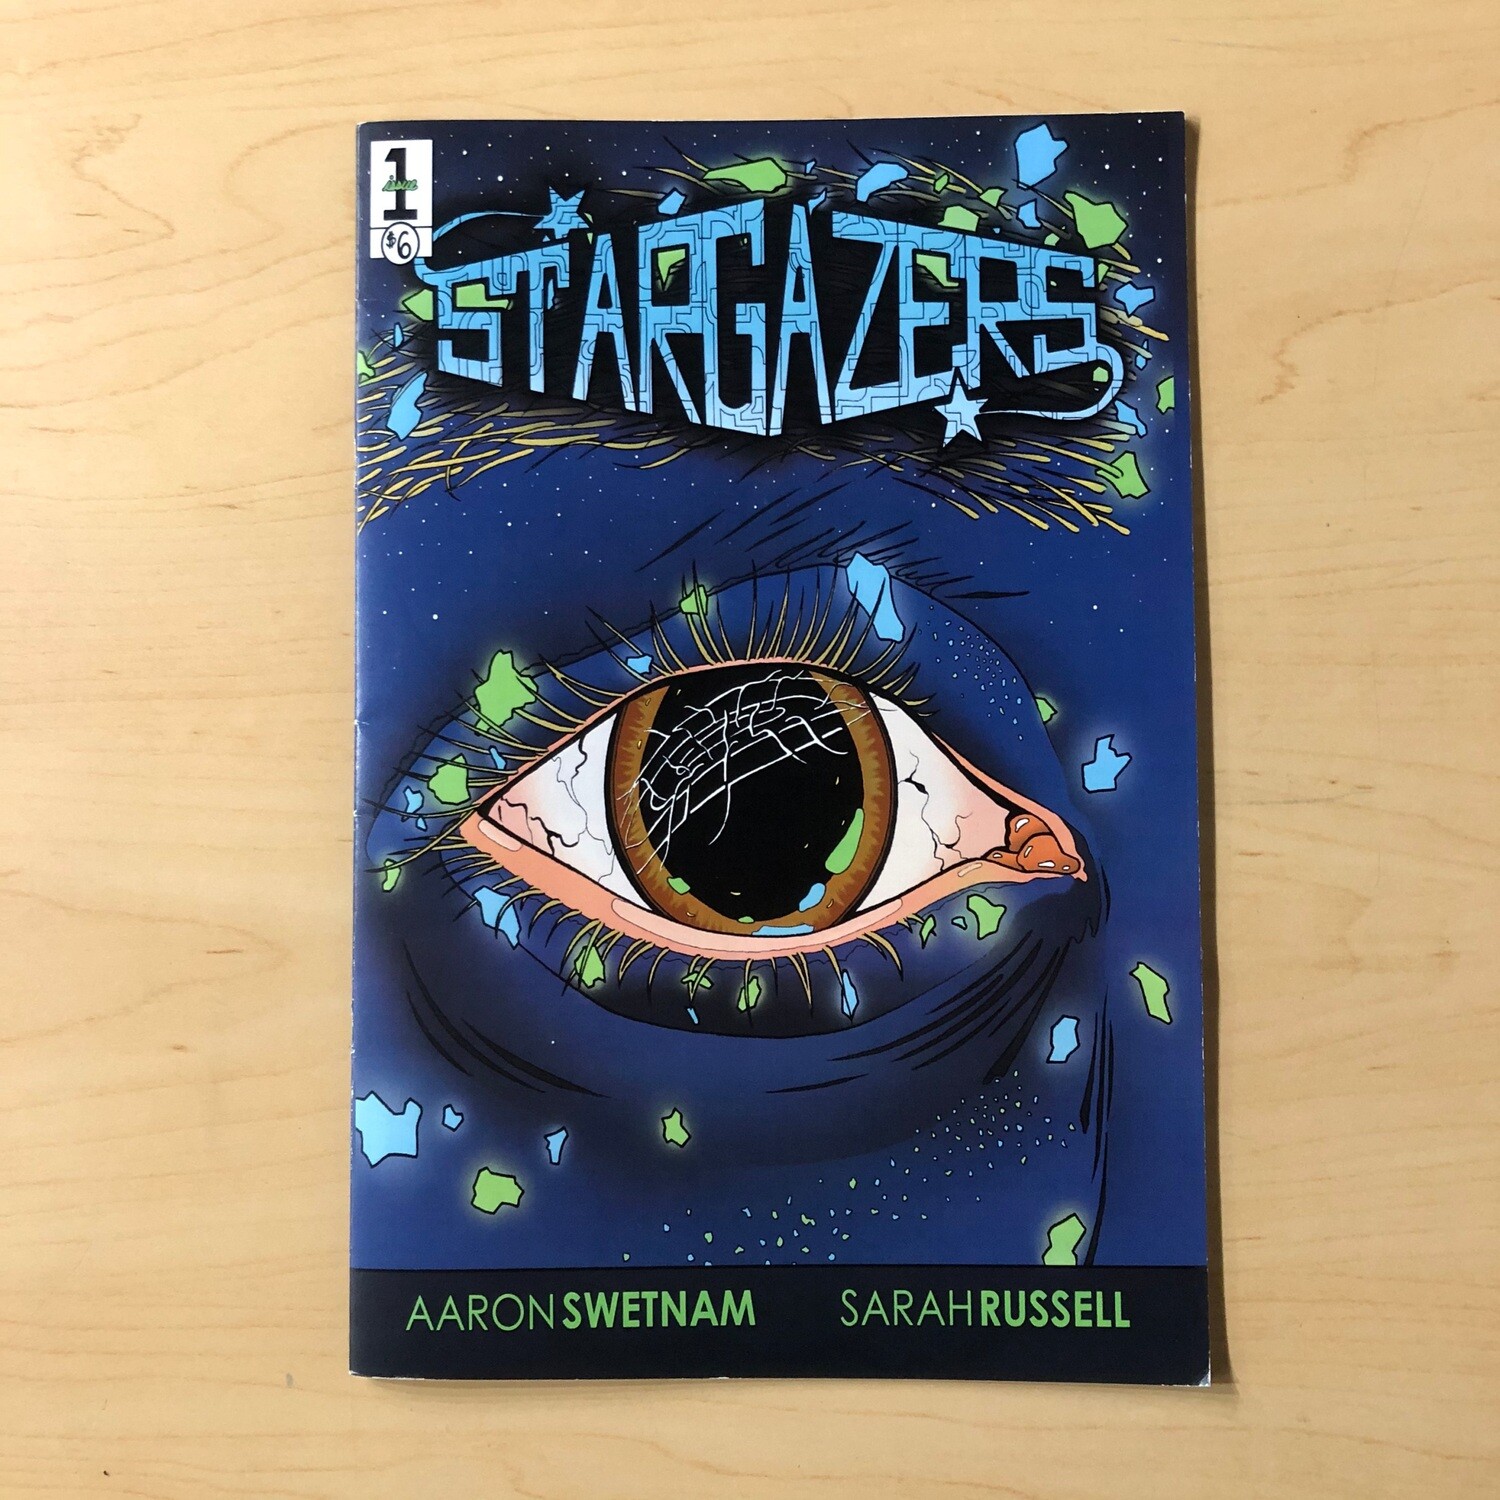 Stargazers #1 - Comic by Aaron Swetnam and Sarah Russell